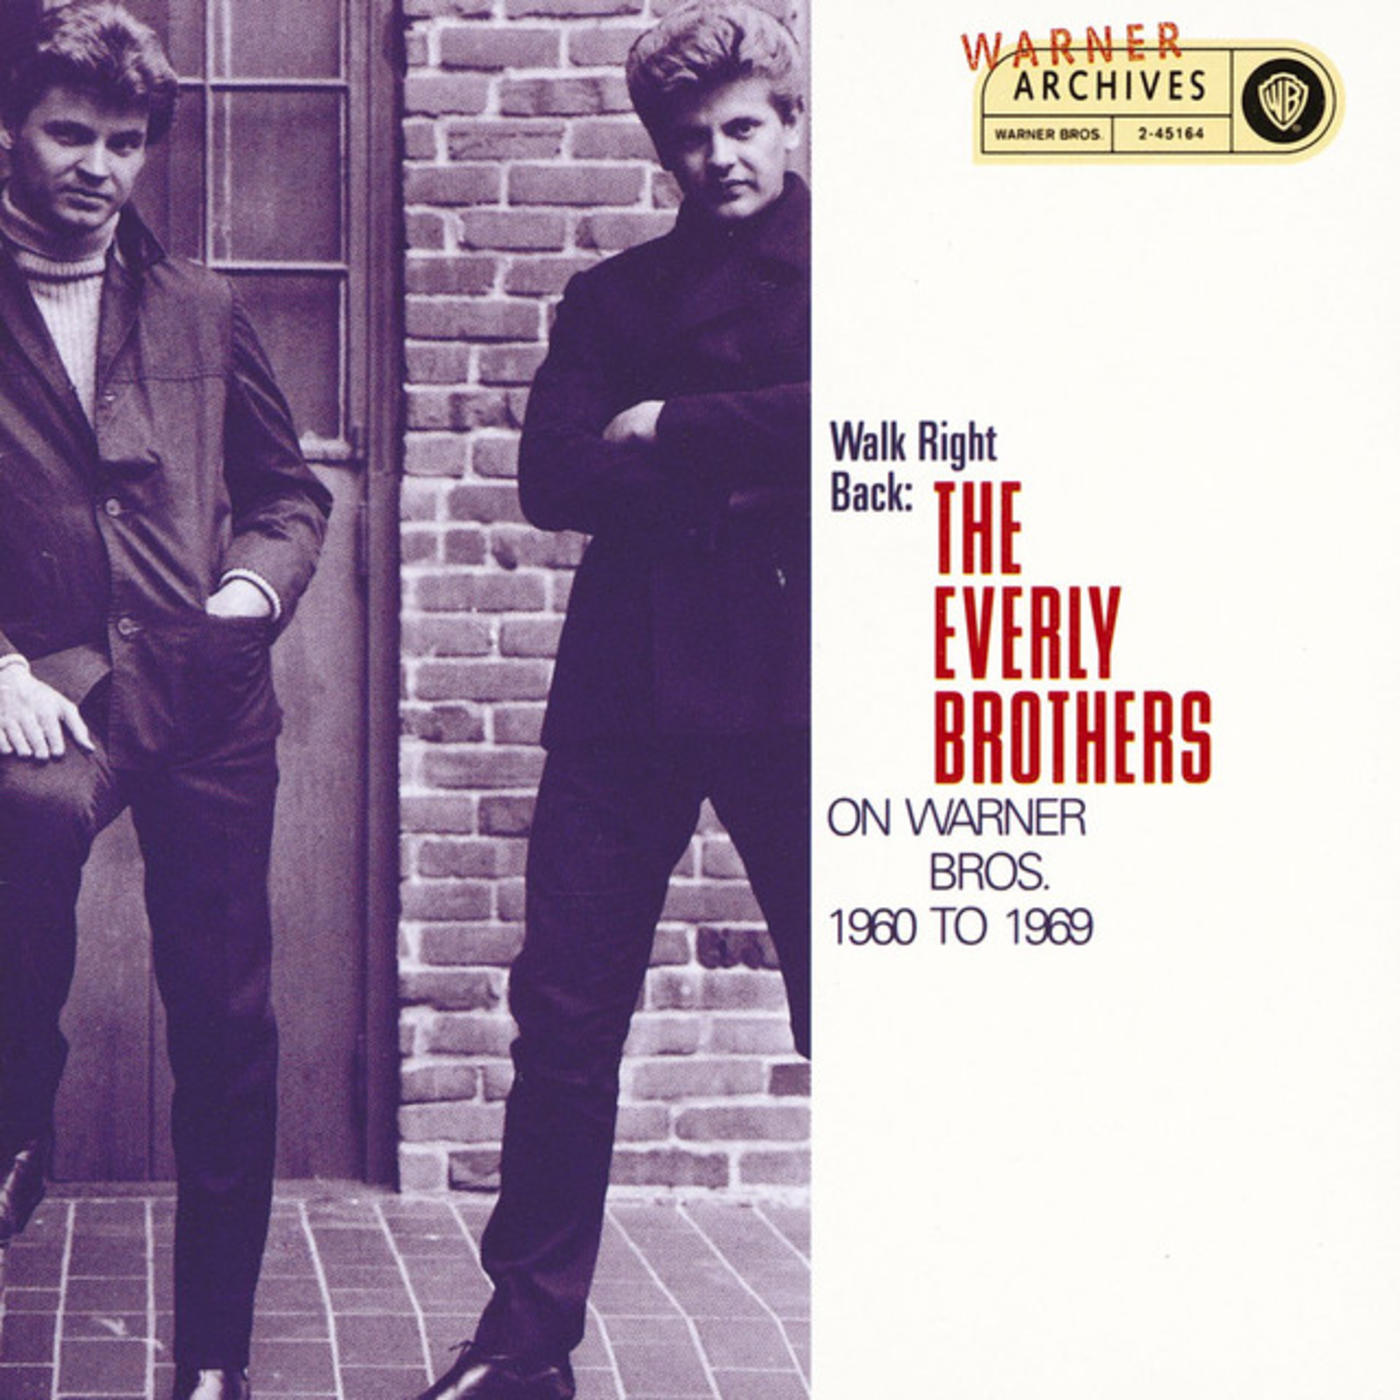 Walk Right Back: The Everly Brothers On Warner Bros. 1960-1969